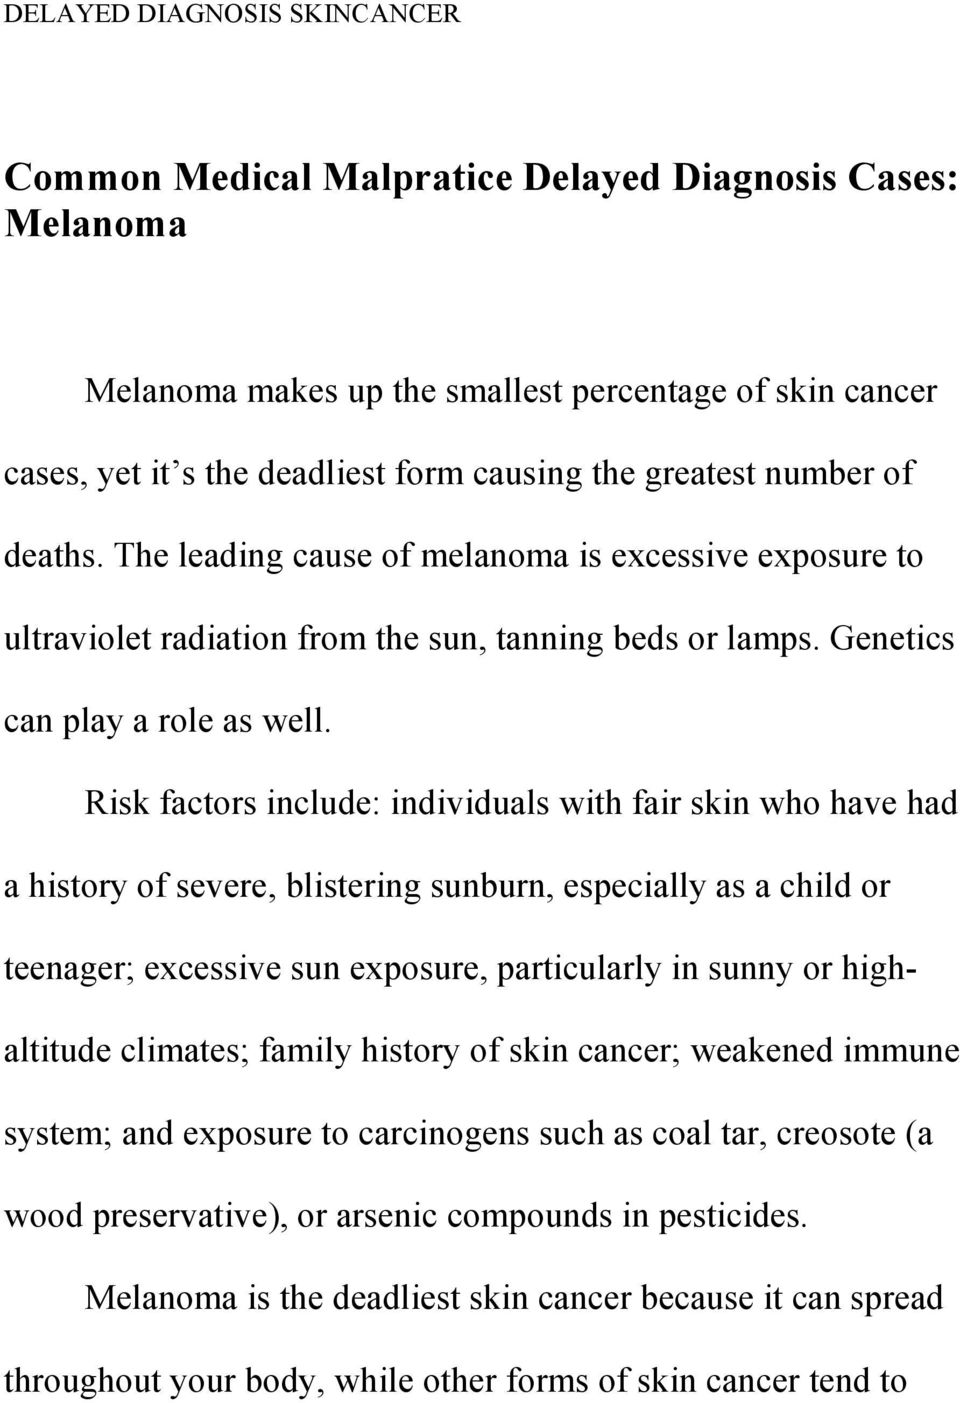 Risk factors include: individuals with fair skin who have had a history of severe, blistering sunburn, especially as a child or teenager; excessive sun exposure, particularly in sunny or highaltitude